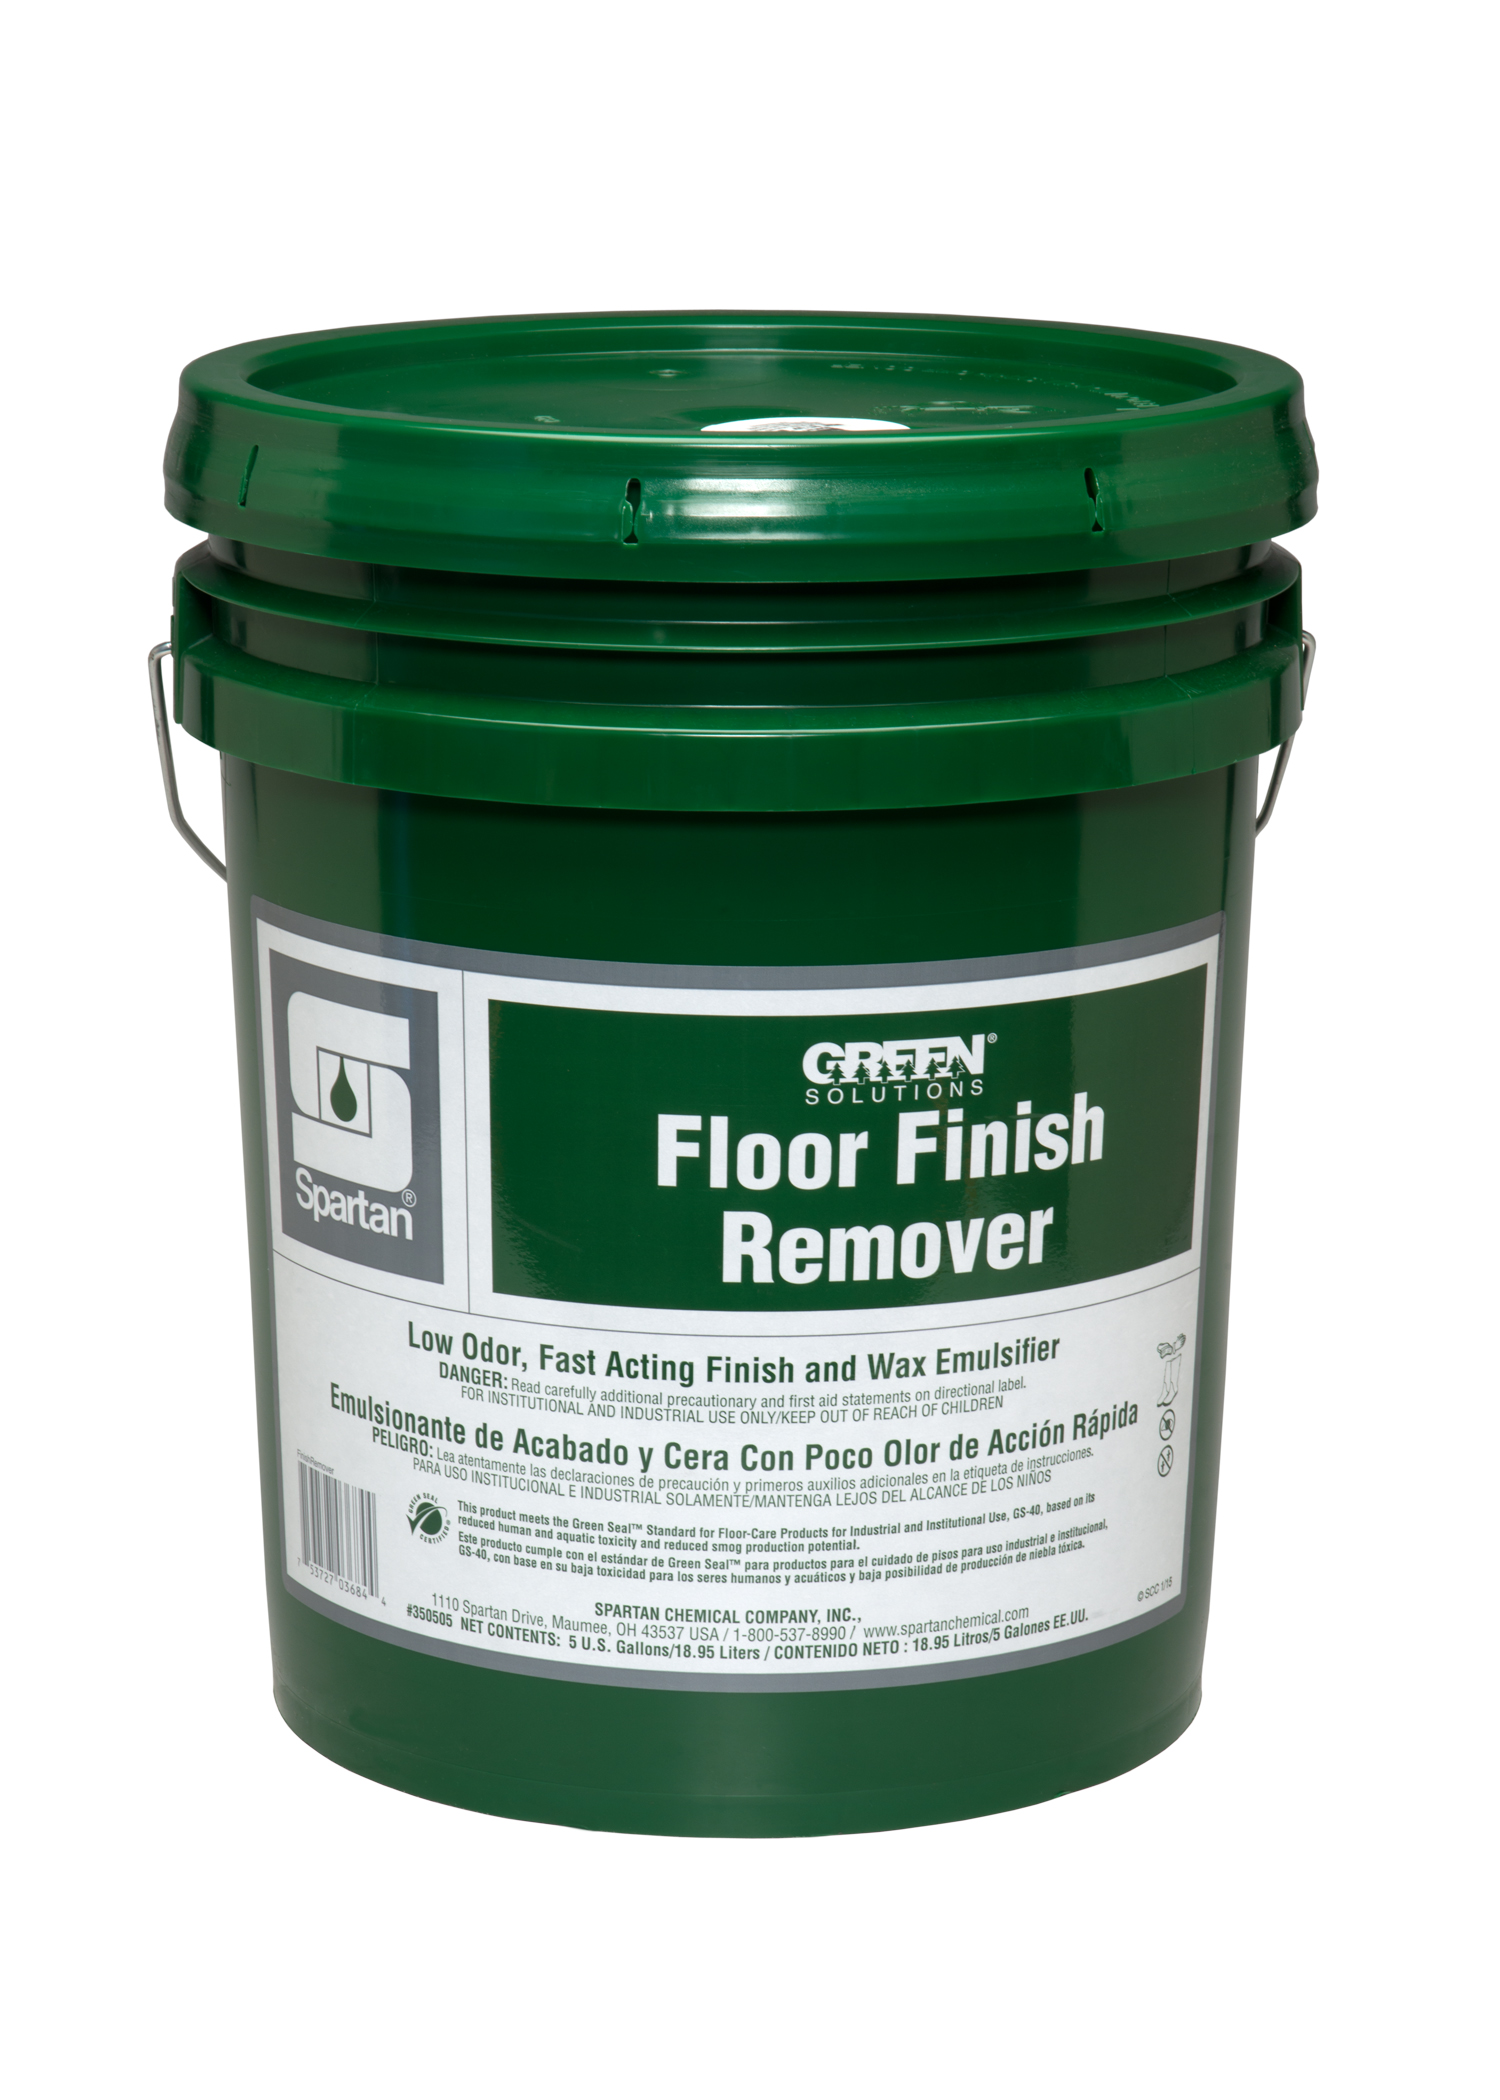 Green Solutions® Floor Finish Remover 5 gallon pail